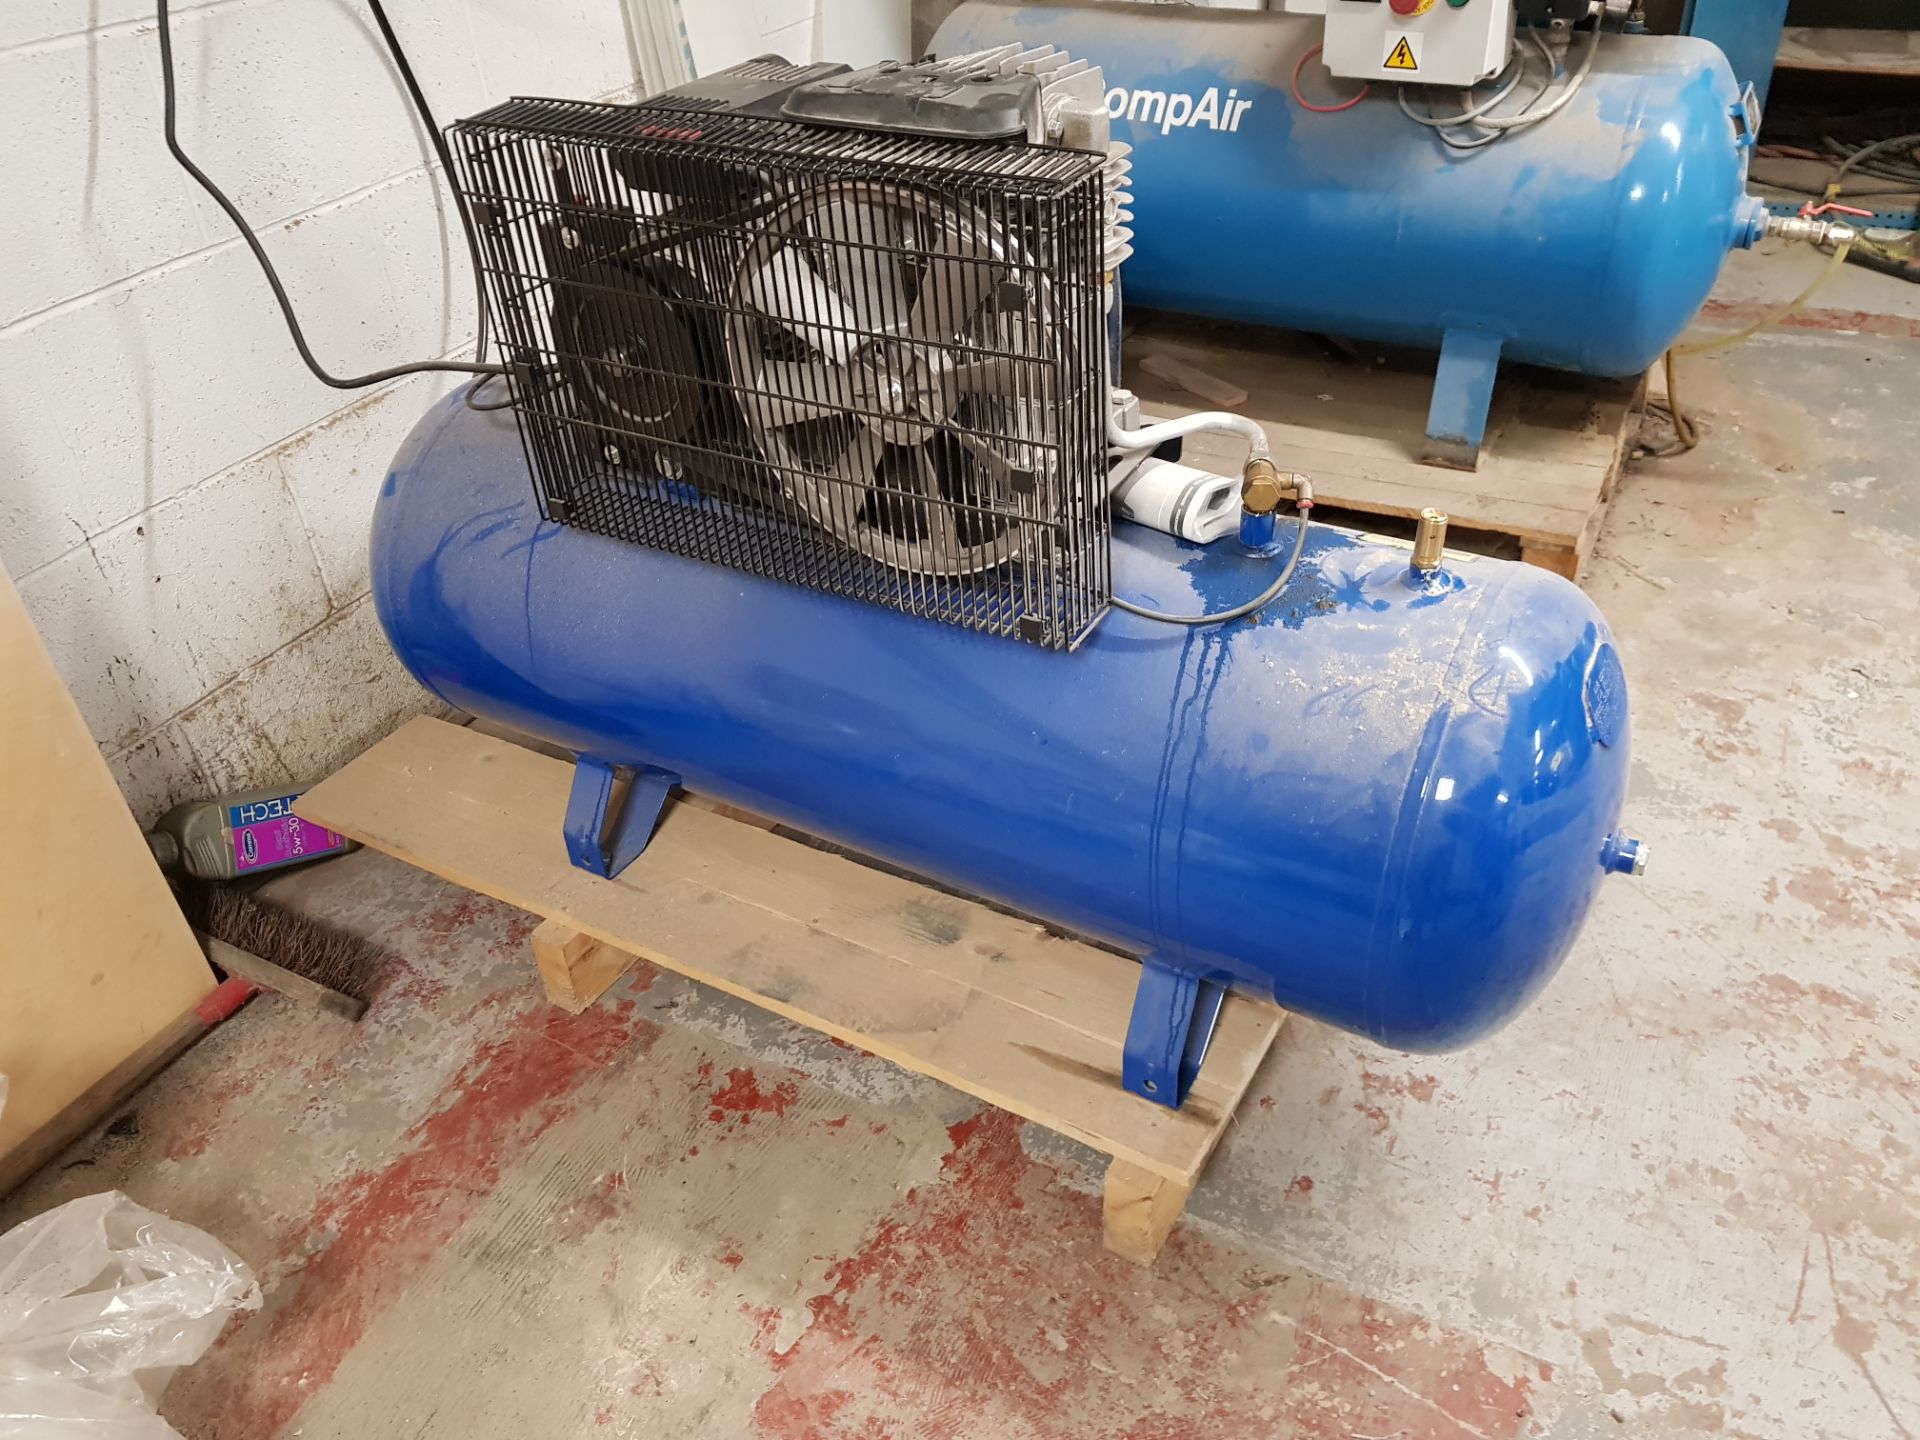 THORITE PROFESSIONAL 150L AIR COMPRESSOR MODEL - TH141501 SERIAL - FP38157 (ASSETS LOCATED IN - Image 2 of 2